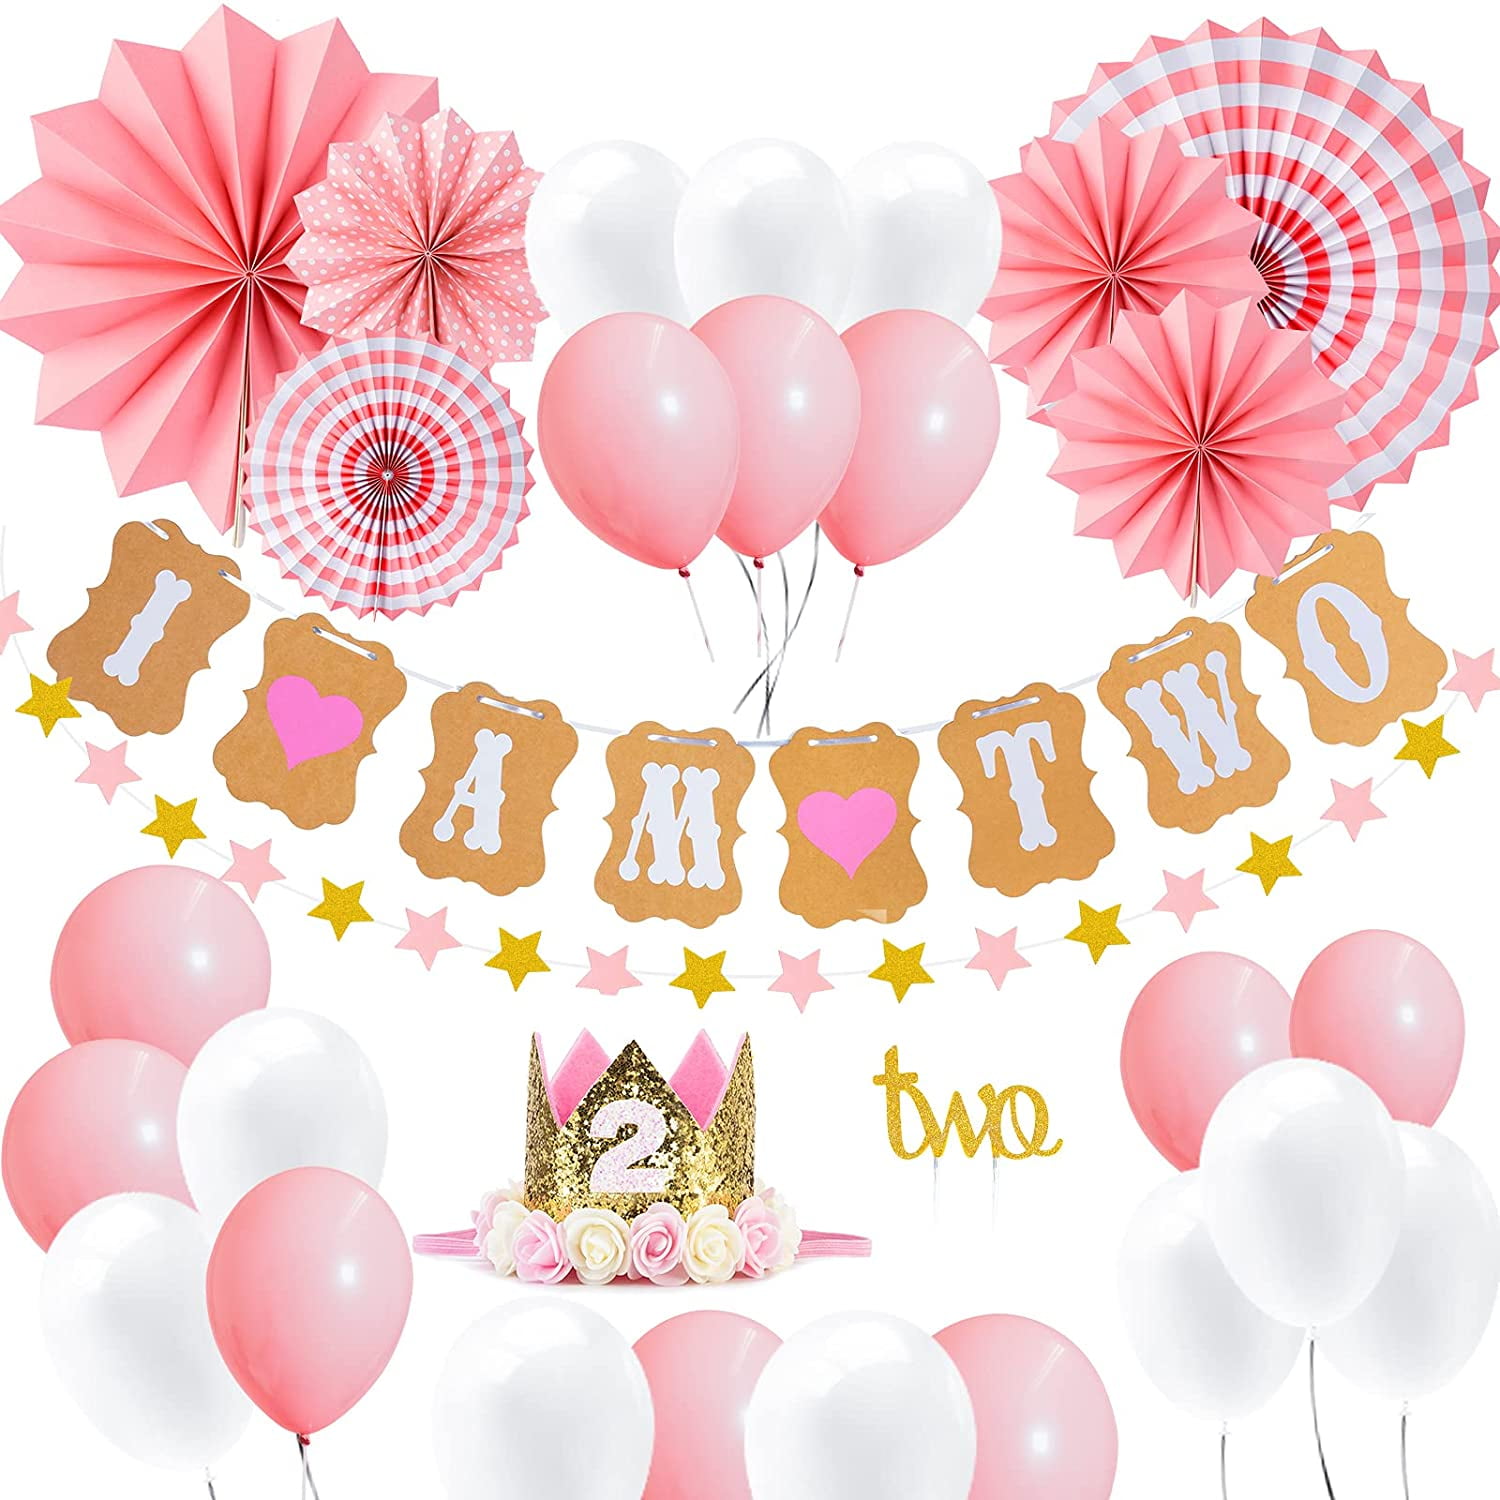 Rainbow Birthday Decoration Set Number Onegirl Or Boy First Birthday Pastel  Transparent Balloons Foil Rainbowbaby Shower Celebration Holiday Event  Congratulations Concept Stock Illustration - Download Image Now - iStock